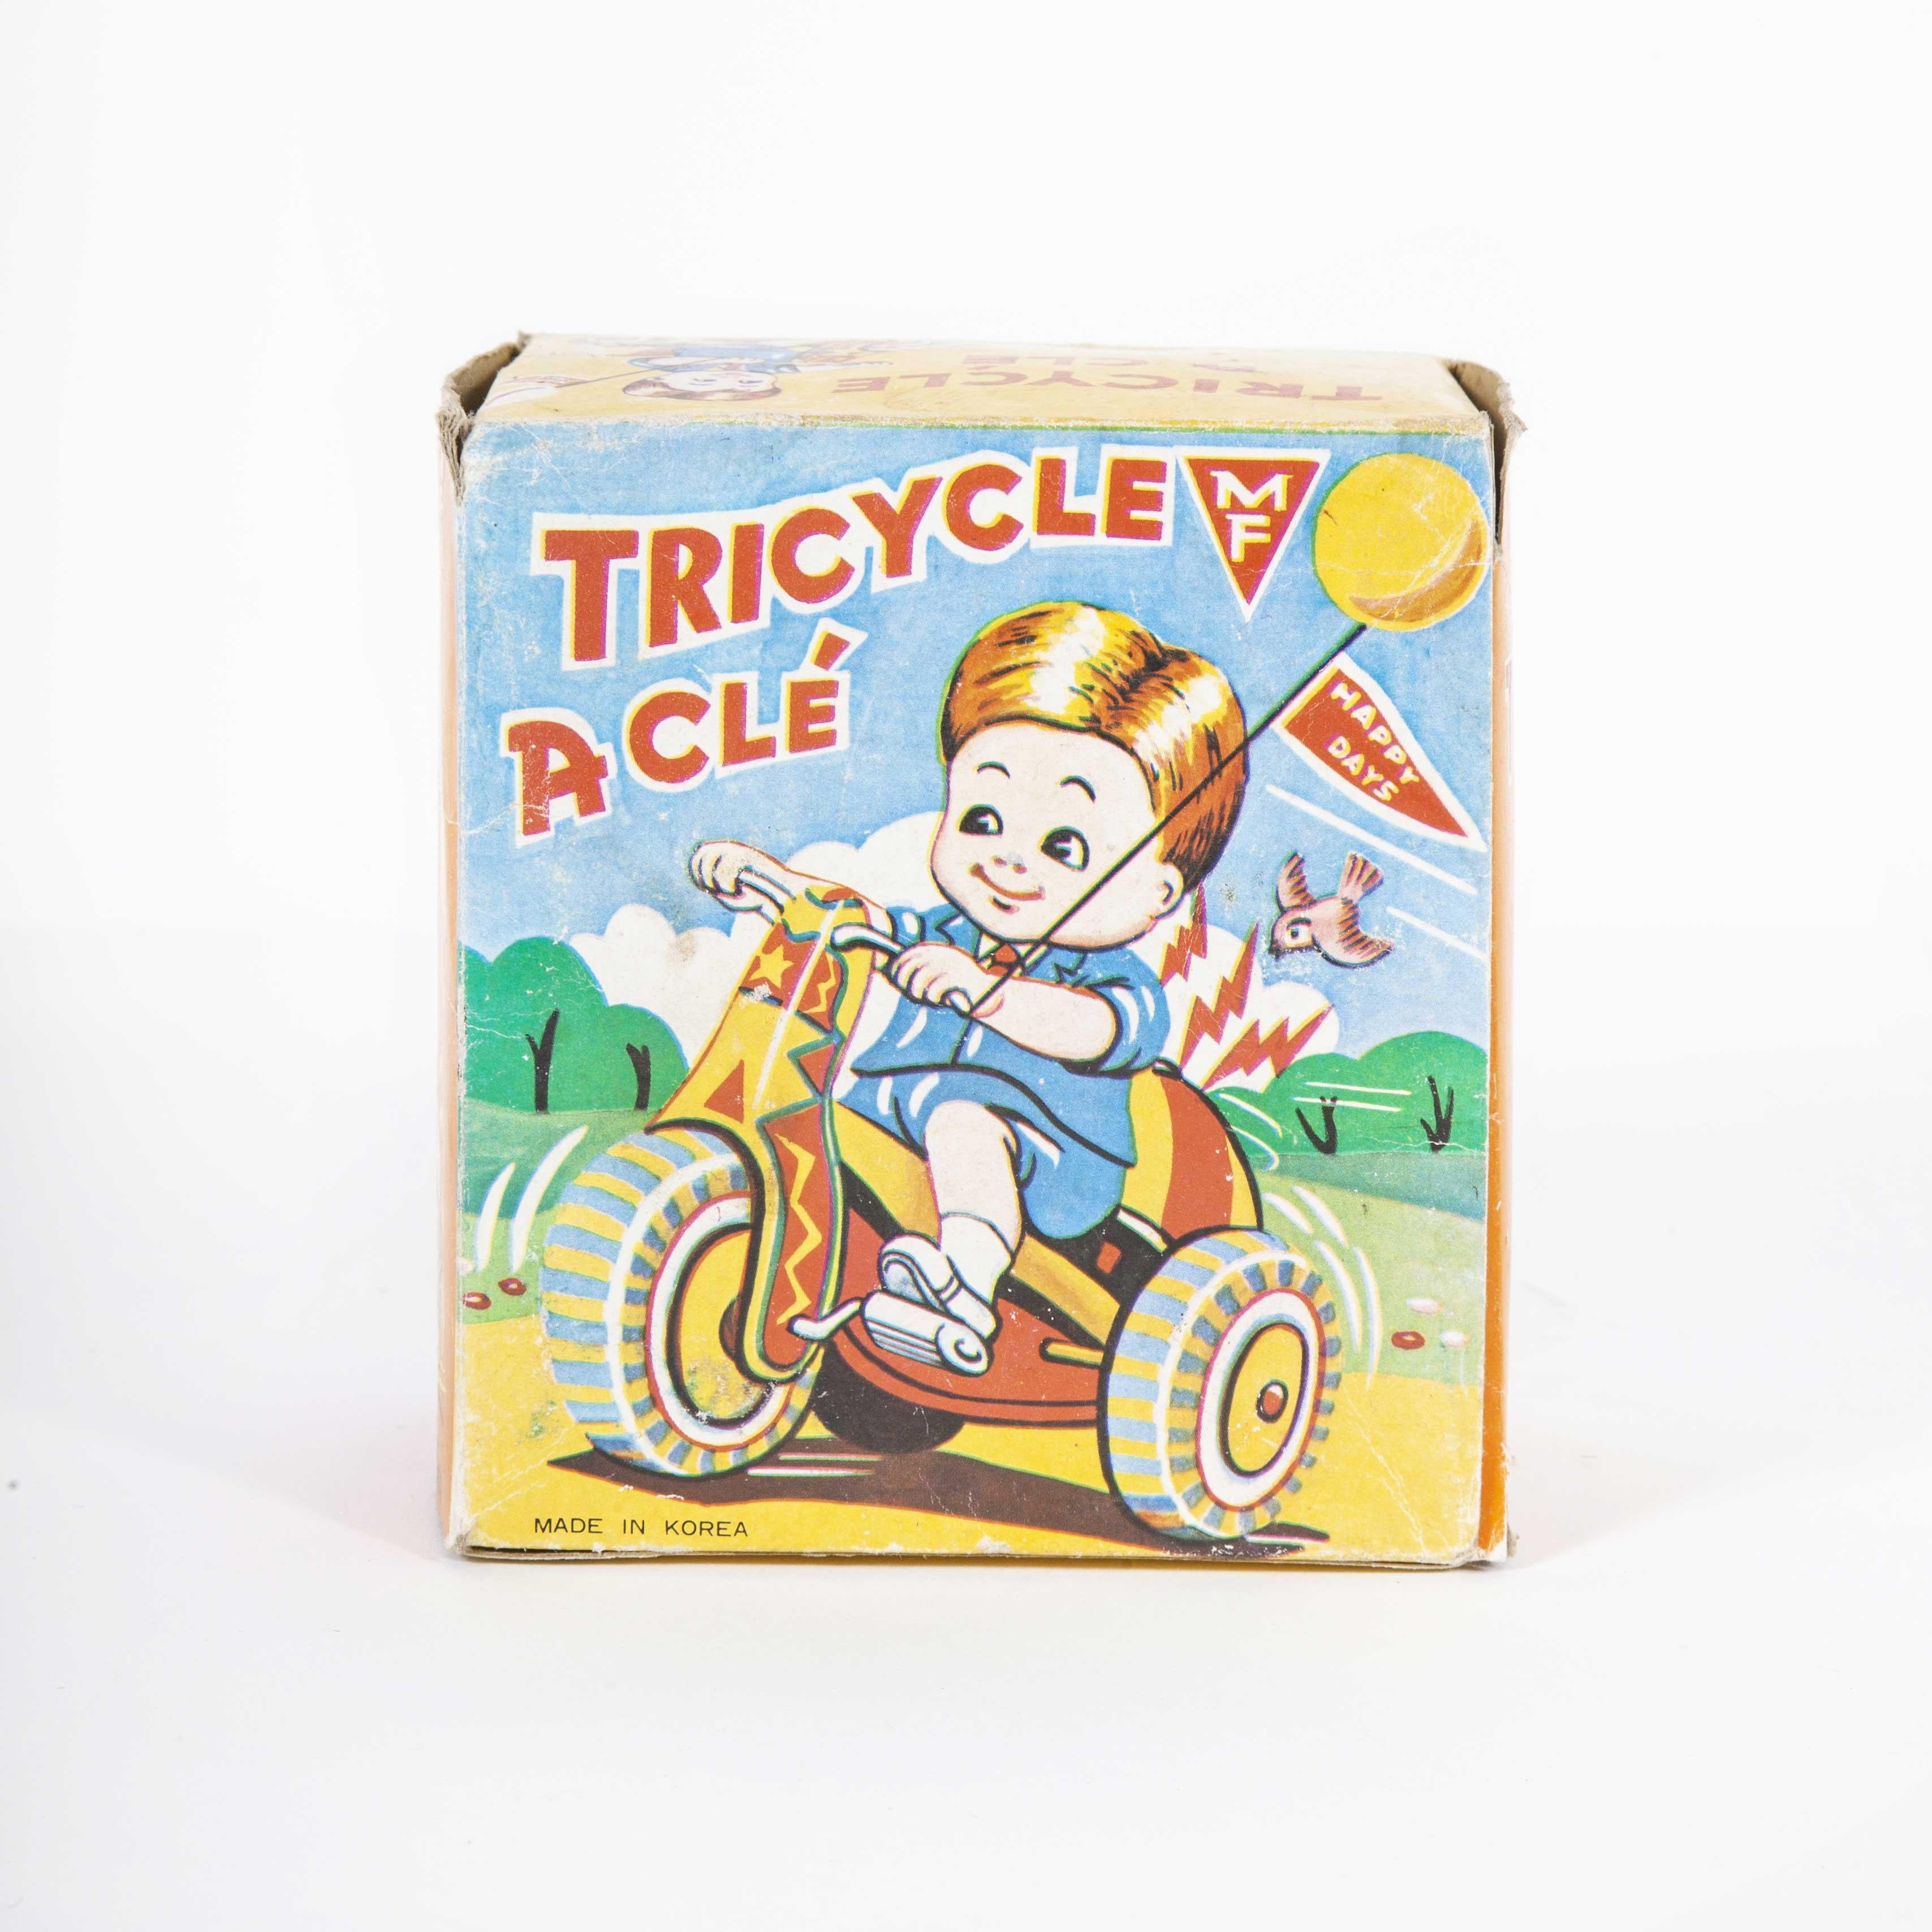 1960s New Old Stock Tin Toys, Decorative 'Toy 1' 1